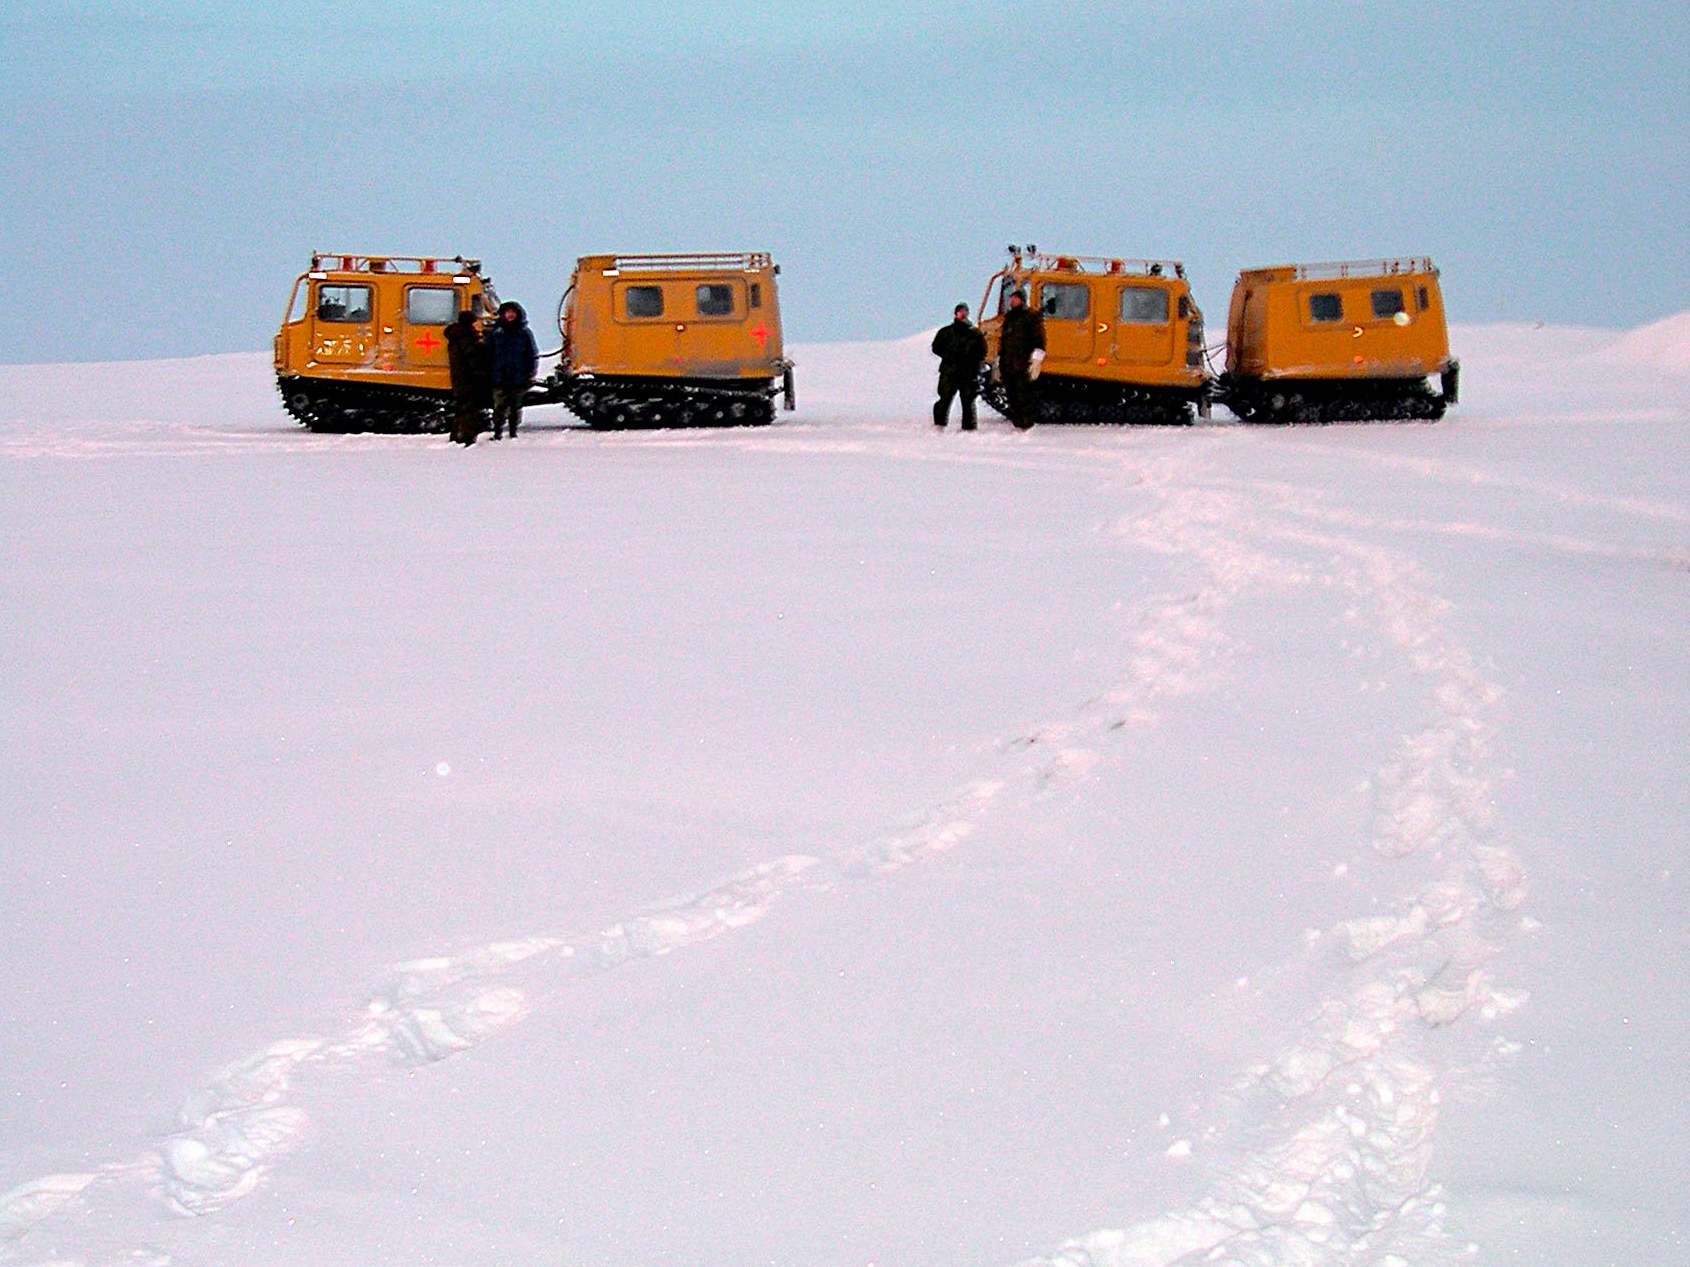 Alert in happier times, when Canadian armed forces personnel stationed at the remote settlement explored the icy landscape